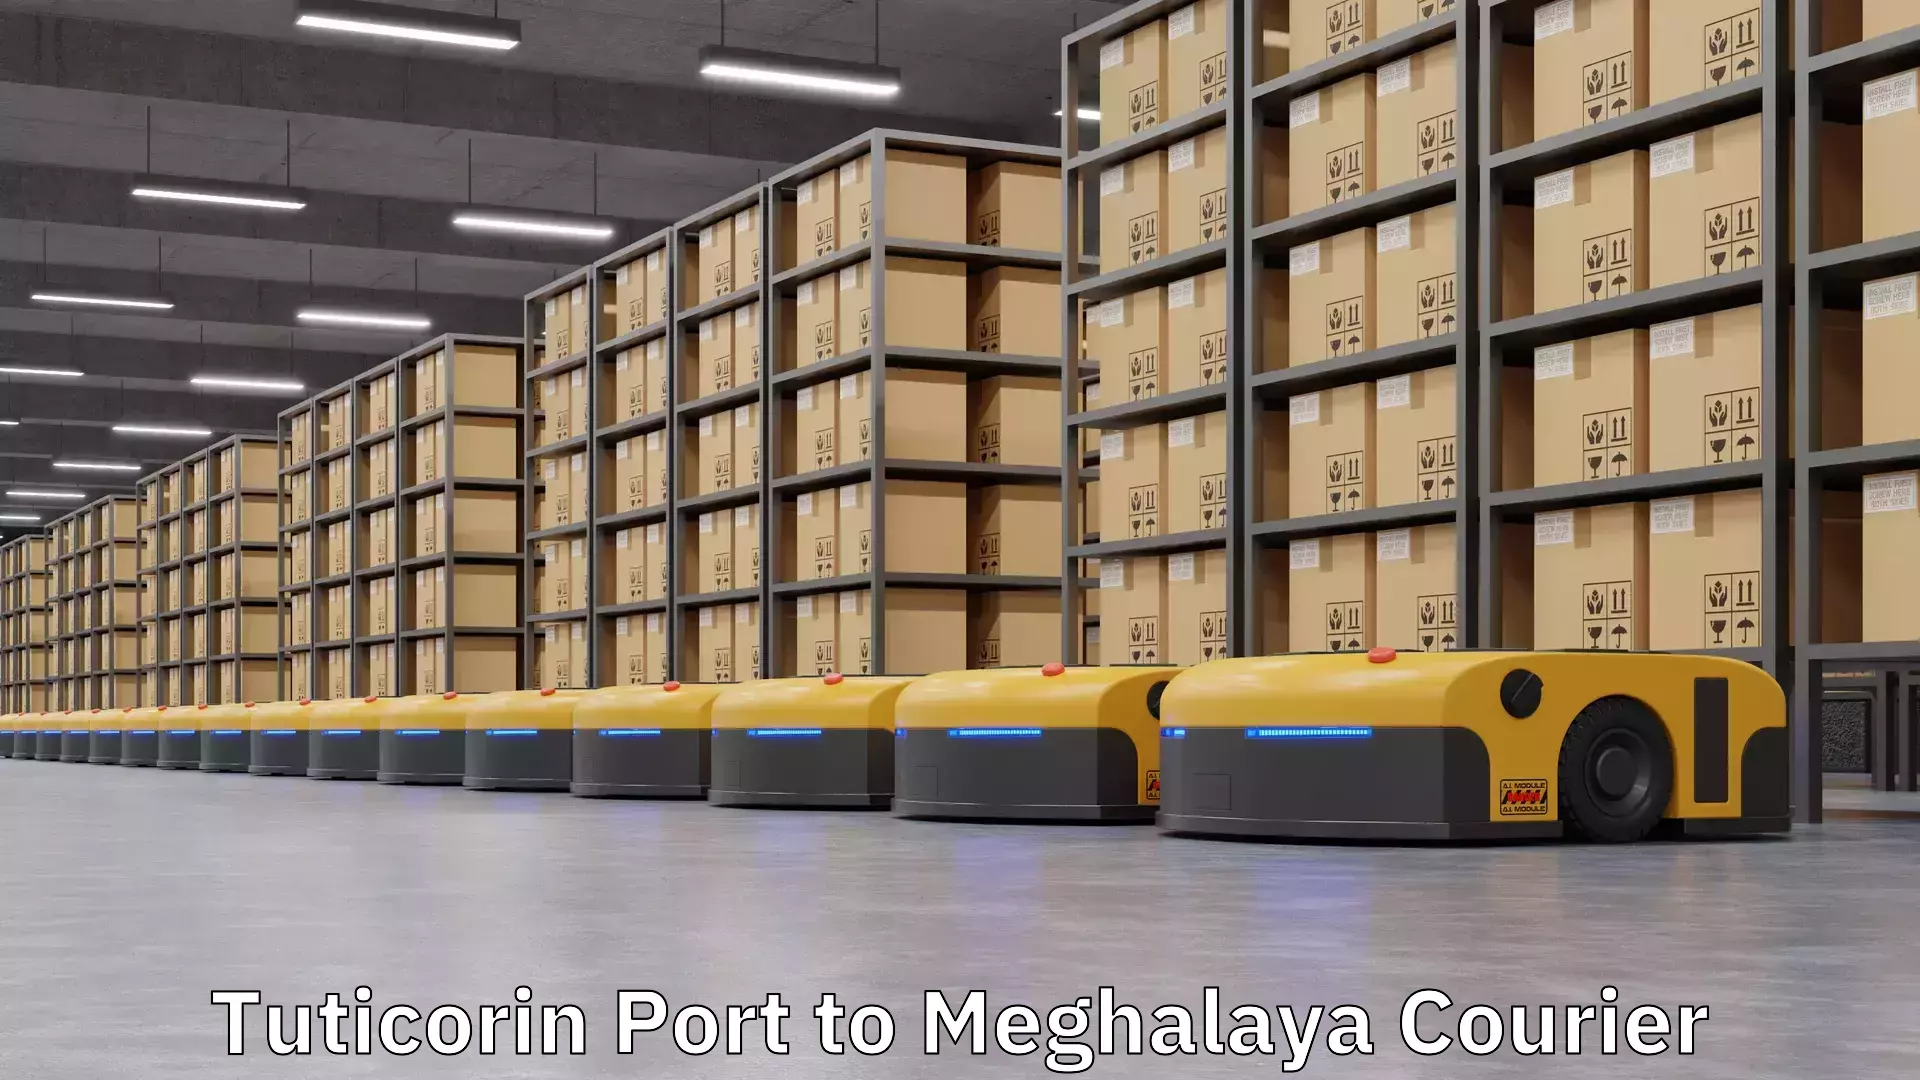 State-of-the-art courier technology Tuticorin Port to Meghalaya